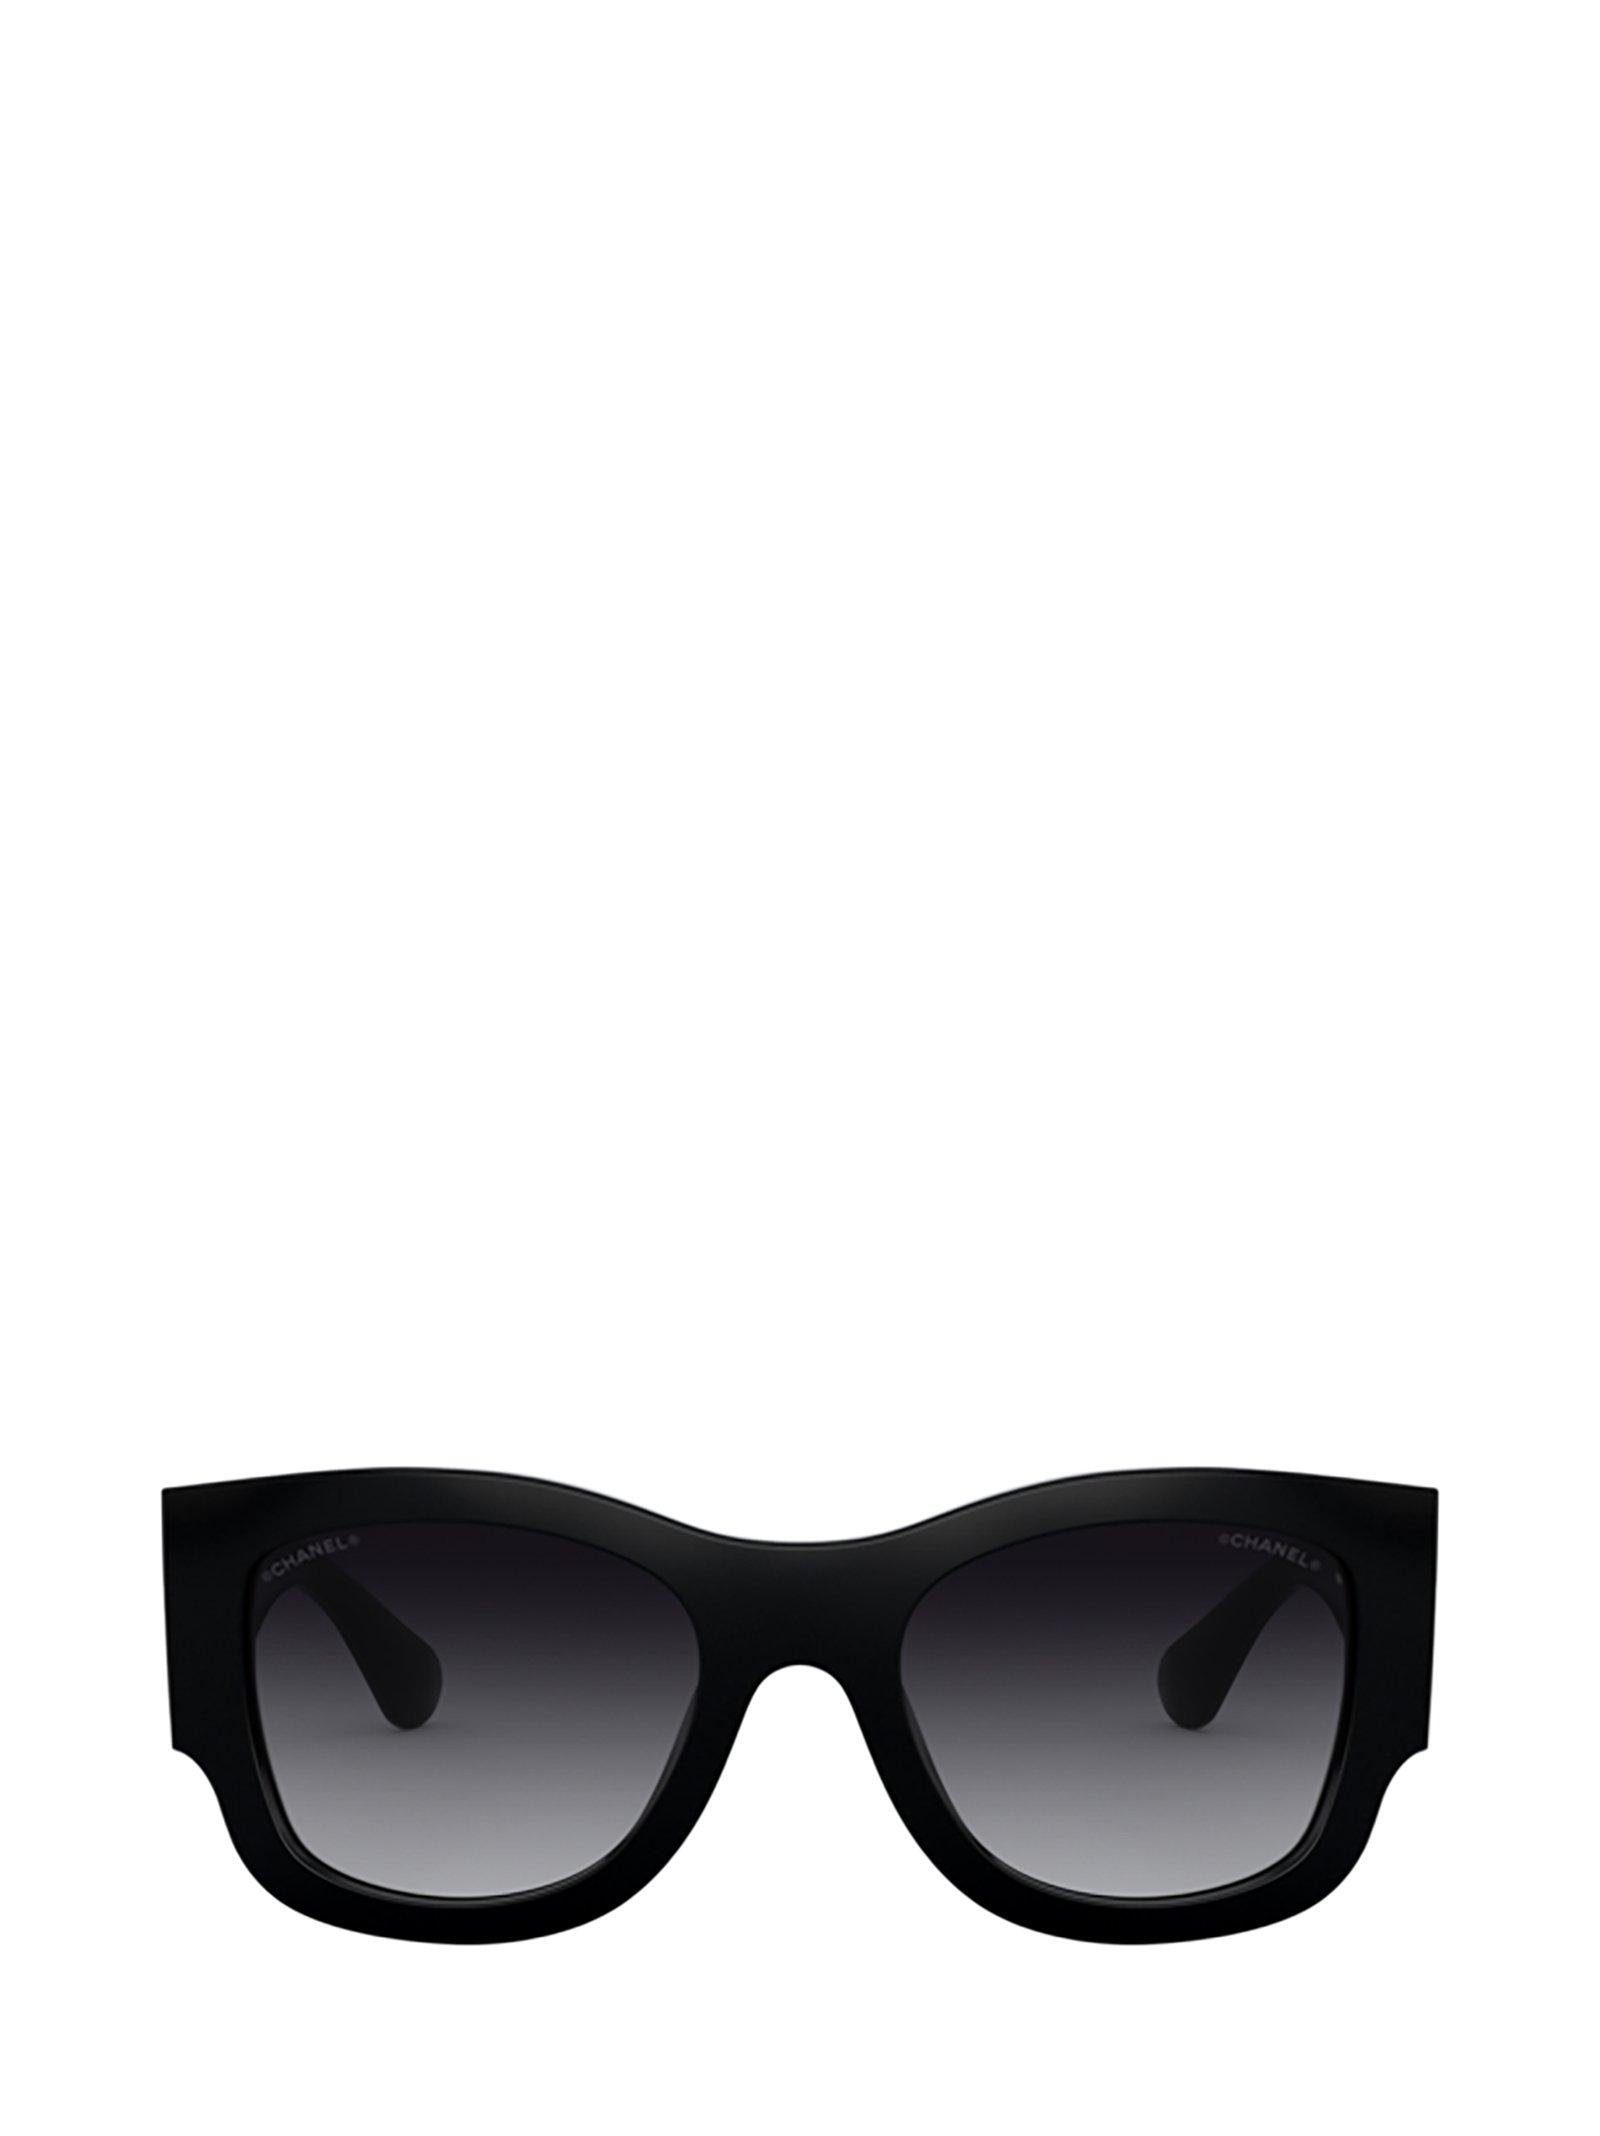 Chanel Square Frame Sunglasses in Black - Lyst